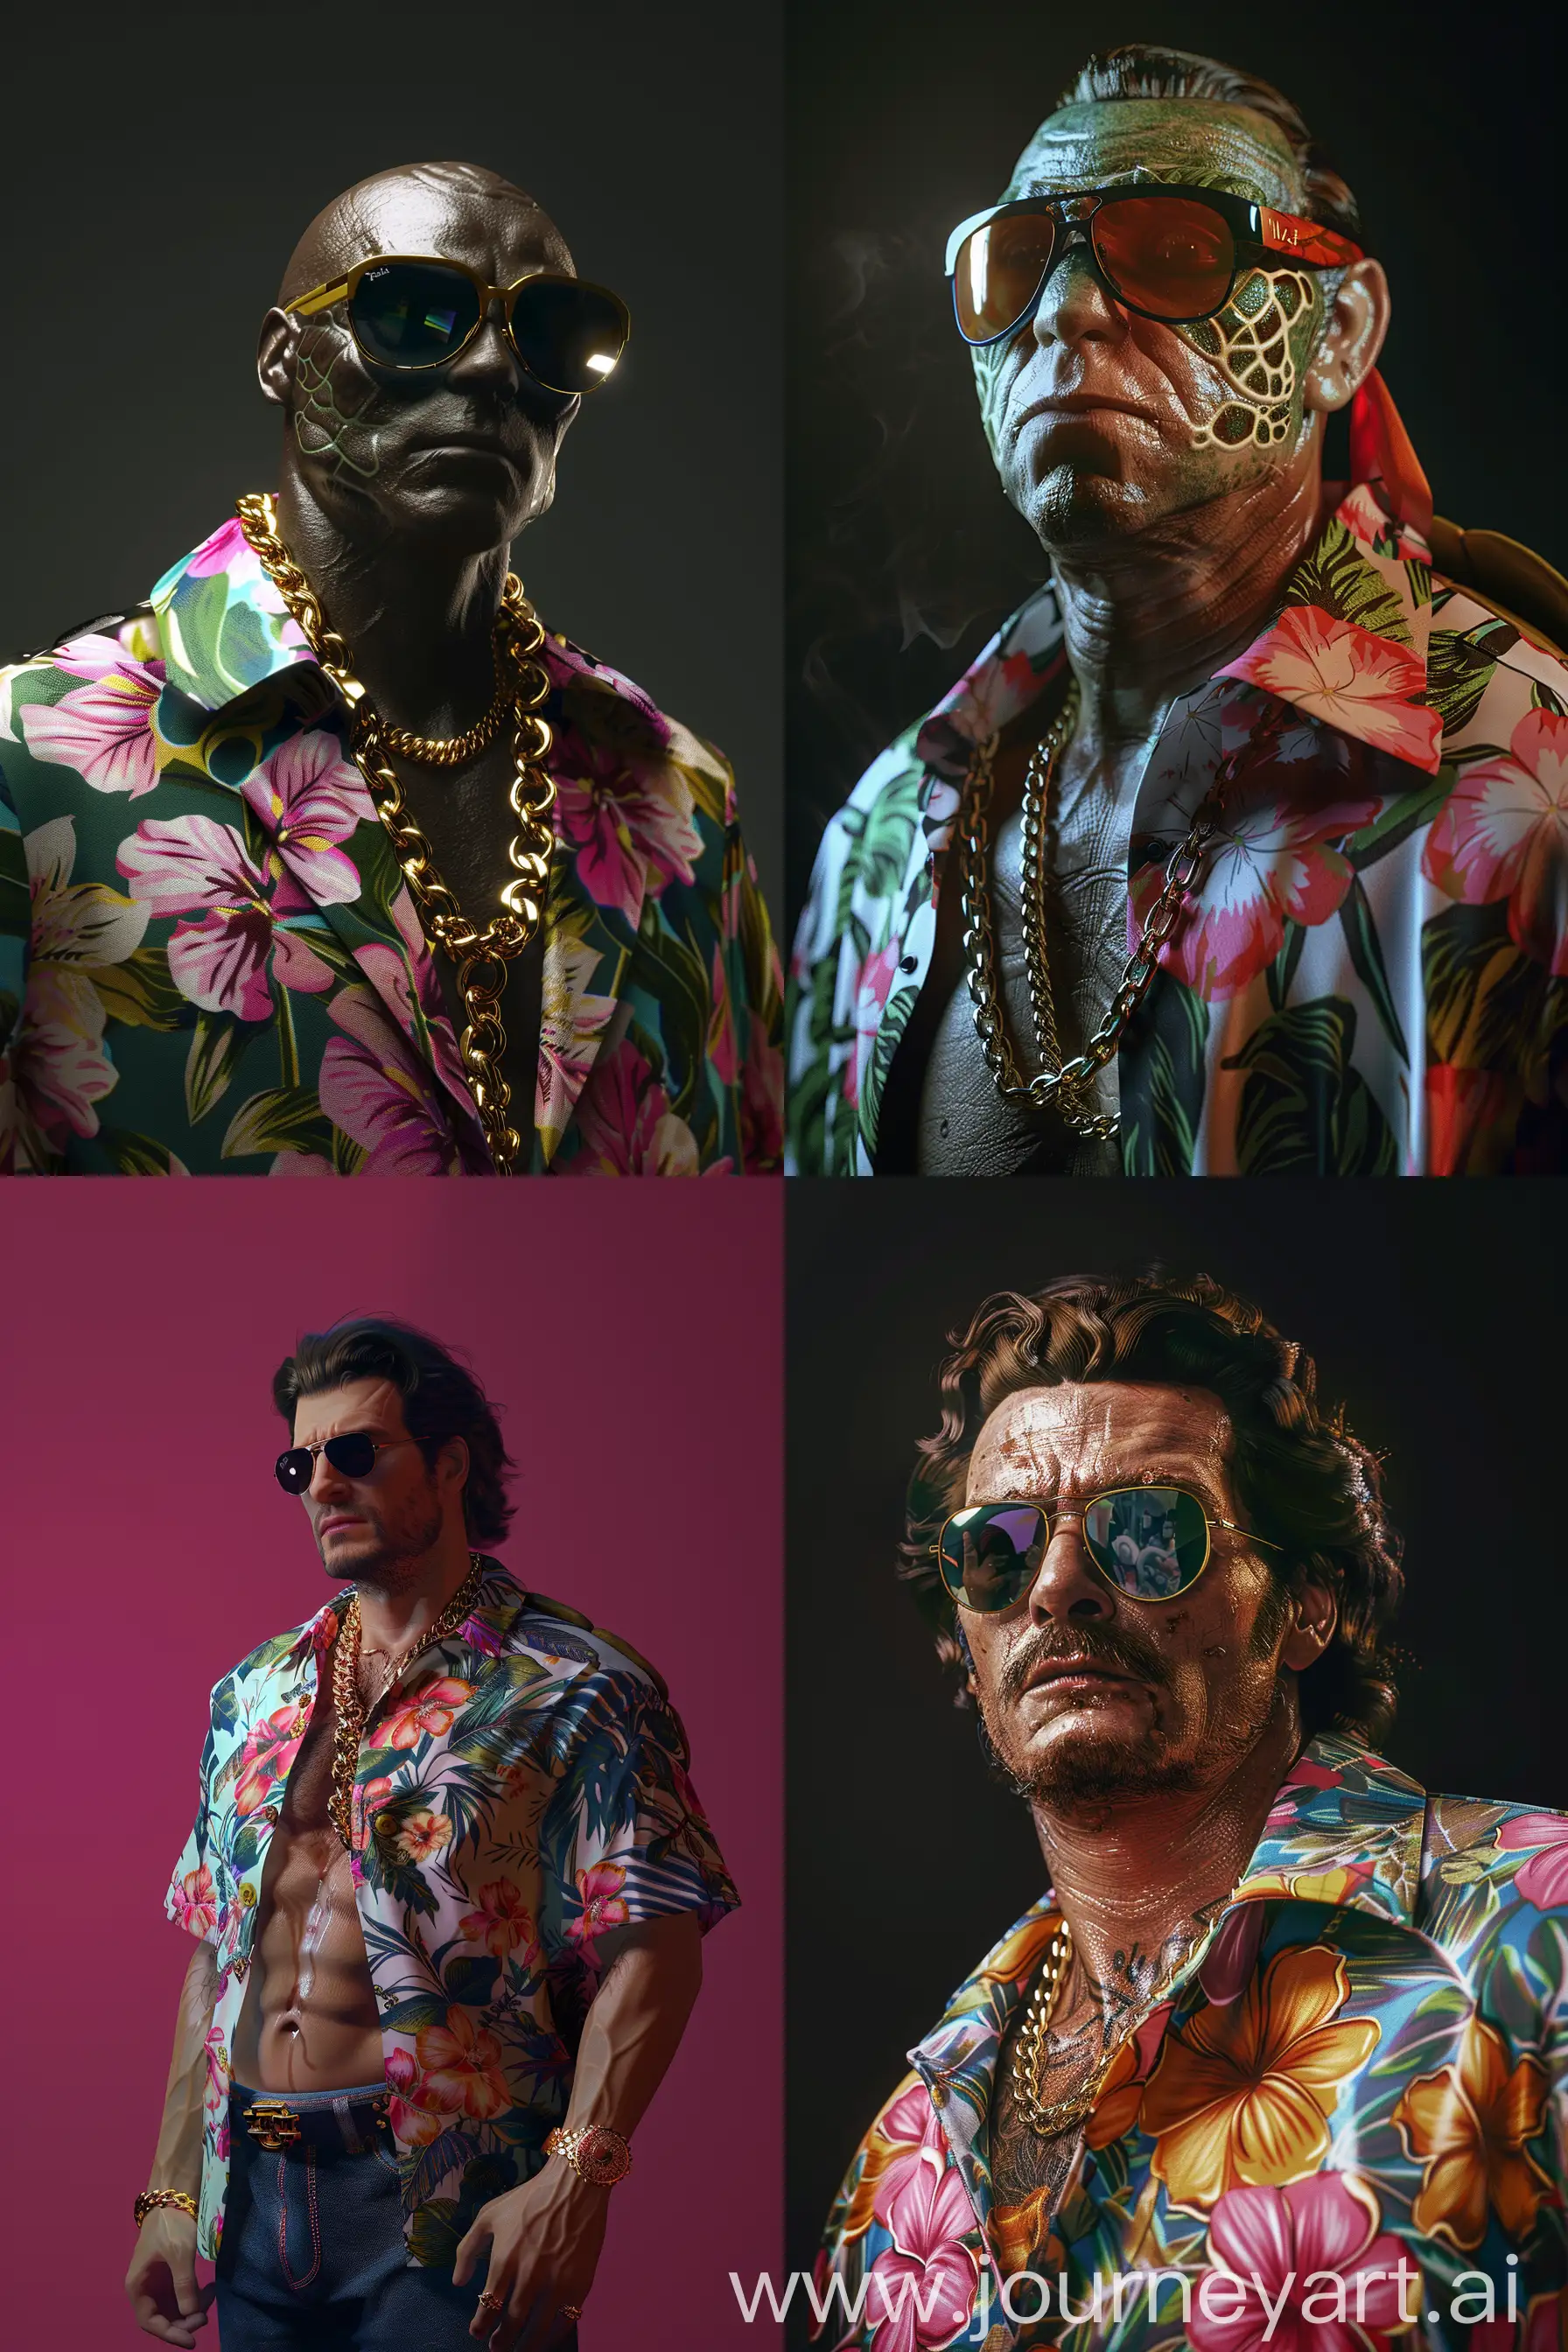 Miami-Vice-Style-Turtle-Wearing-Sunglasses-and-Floral-Shirt